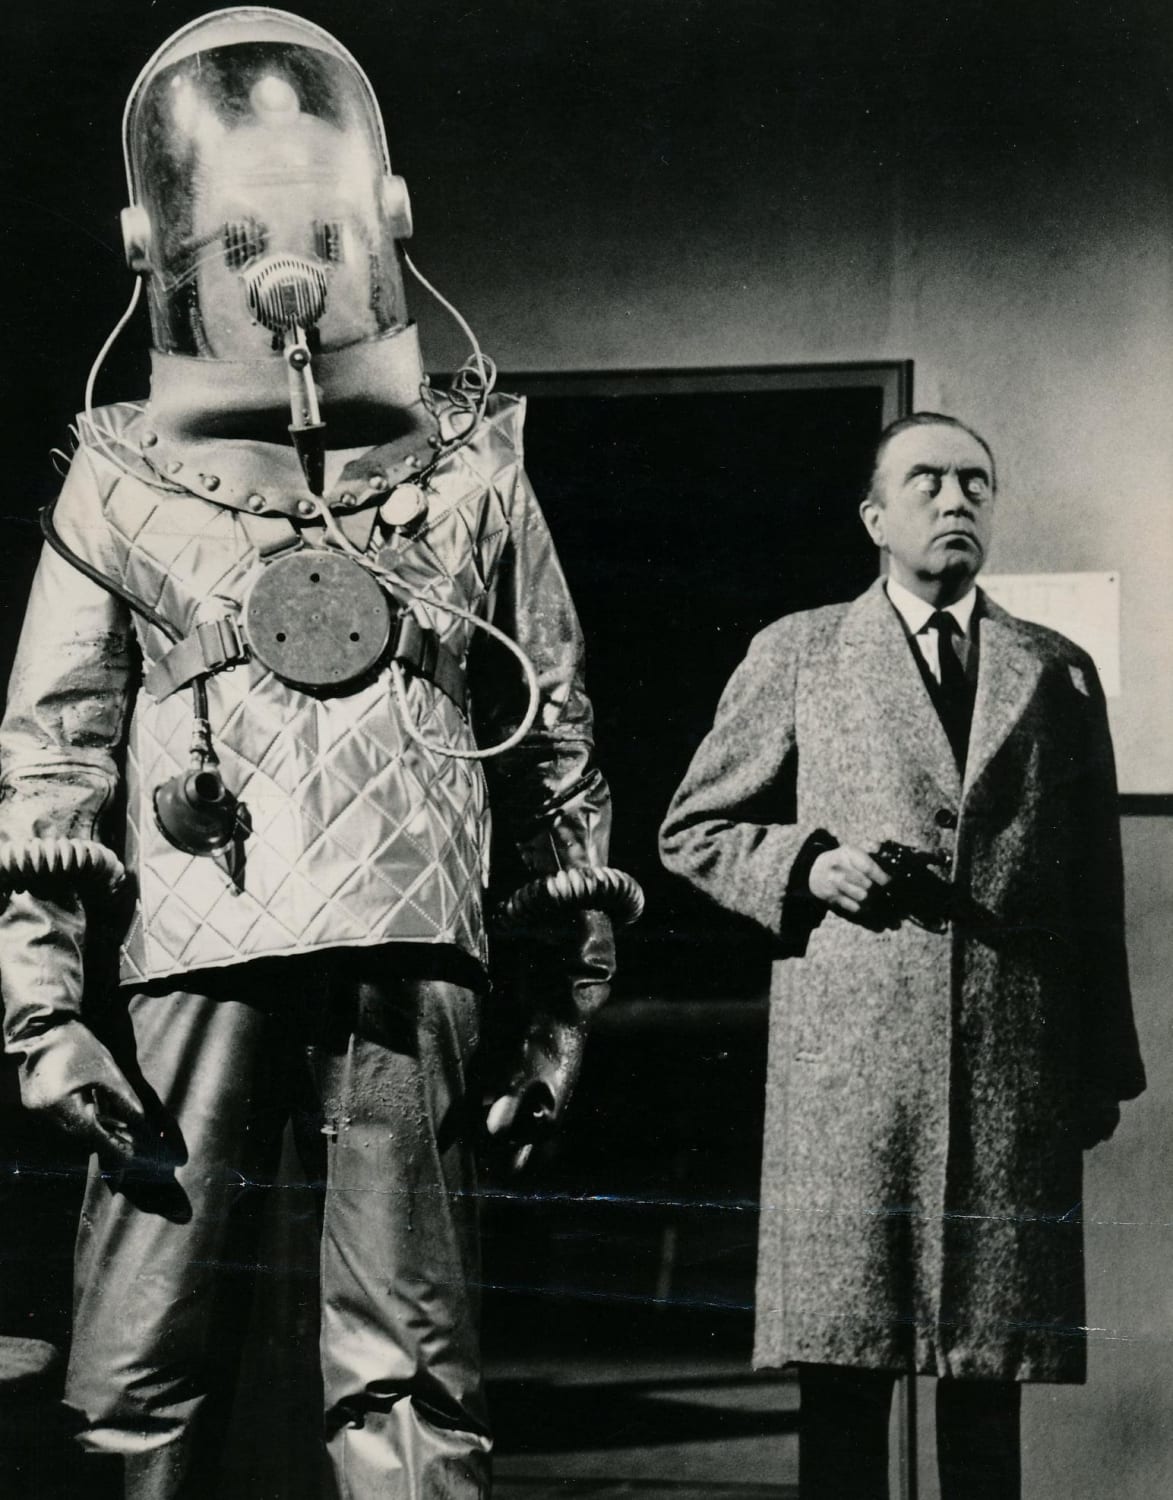 Scene from British Science Fiction film “The Earth Dies Screaming“, directed by Terence Fisher, 1964